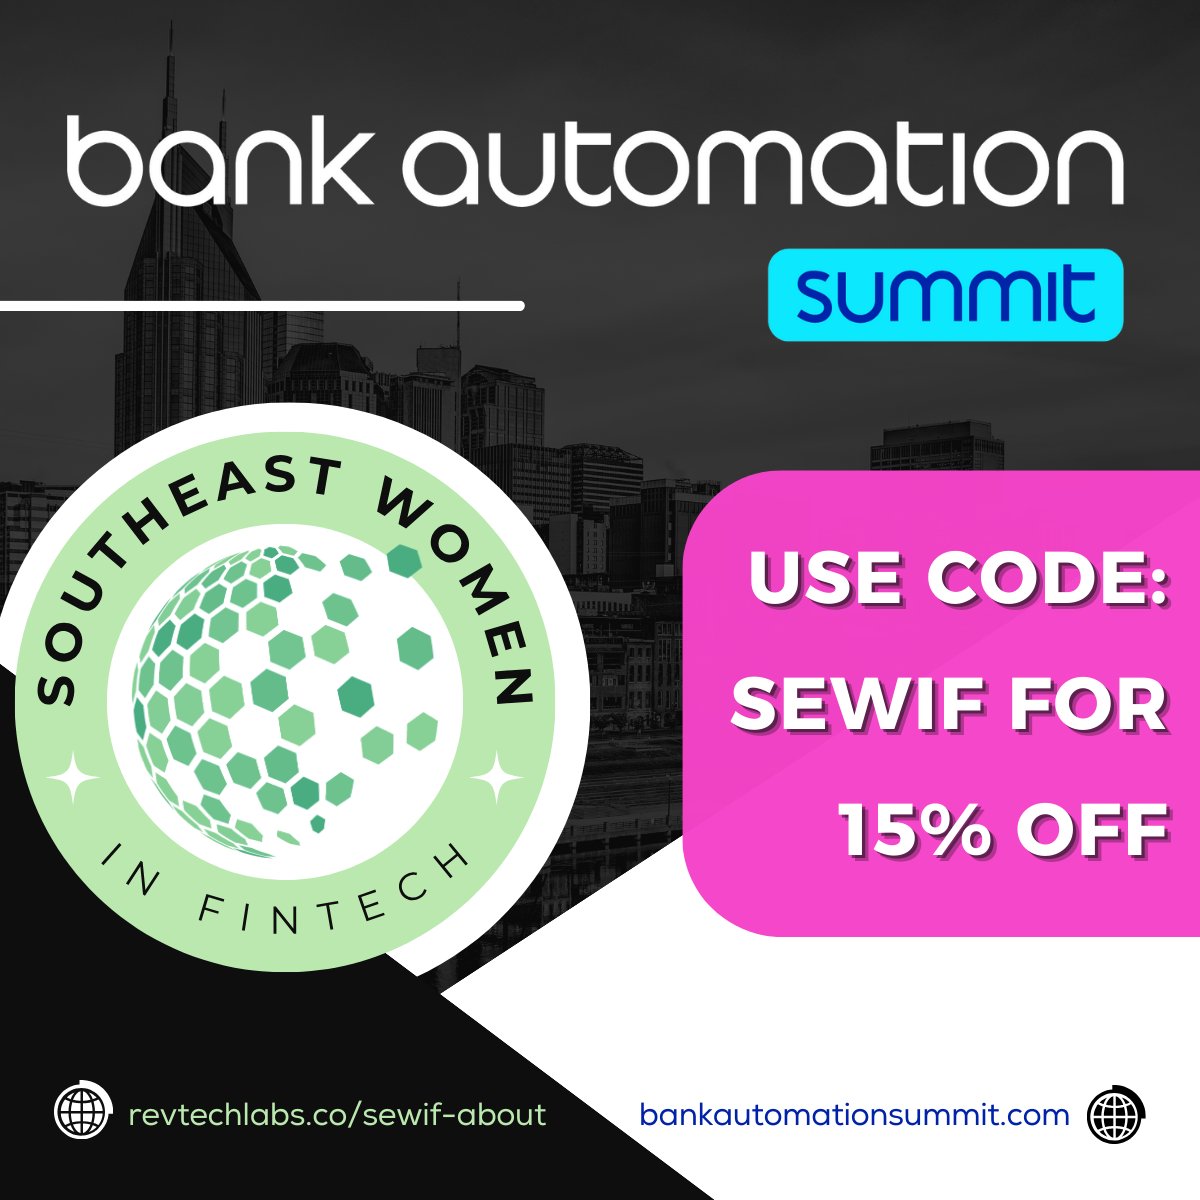 Are you joining us in Nashville at our Southeast Women in Fintech Breakfast Panel? Then we have a deal for you! Head to the @BankAutomation Summit after our breakfast panel and enjoy 15% off your tickets! Use Code: SEWIF at check out. bankautomationsummit.com/product/bank-a…